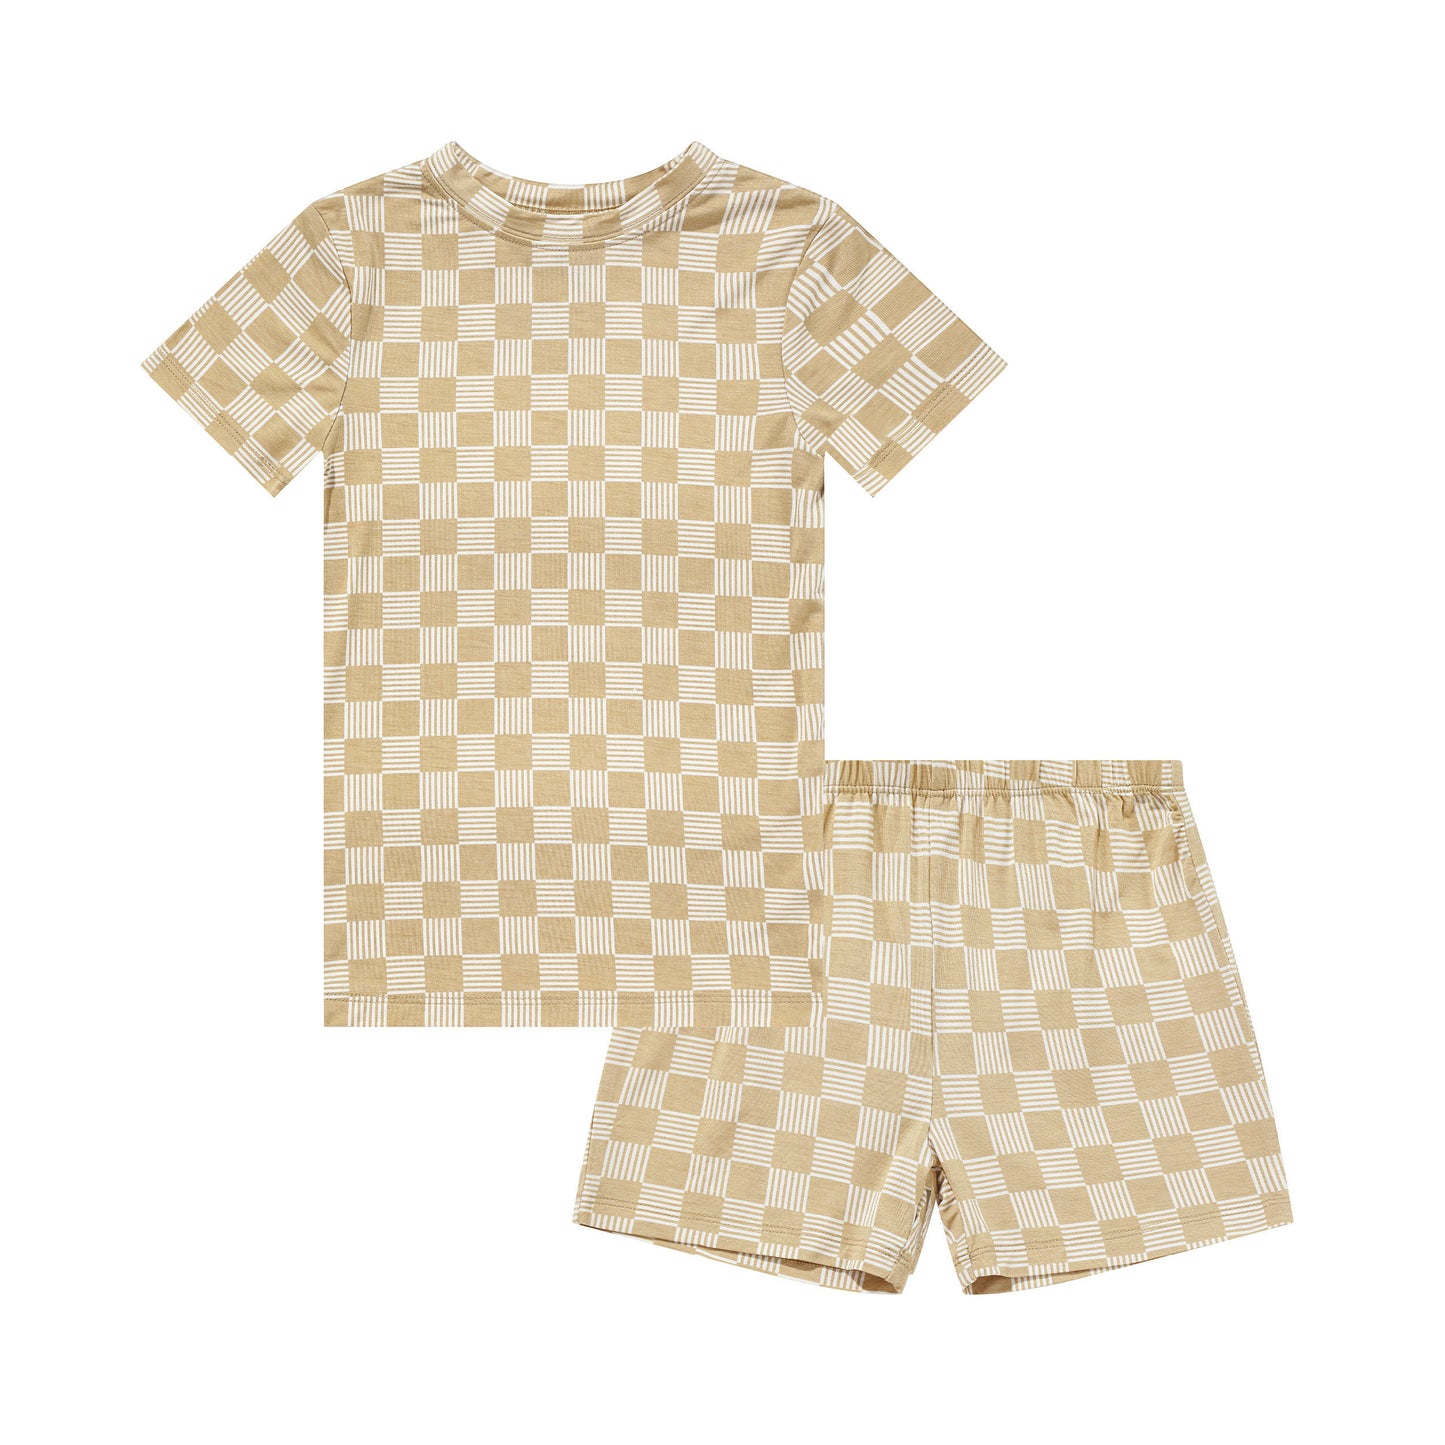 Checkered Lines Shorts Two-Piece Set